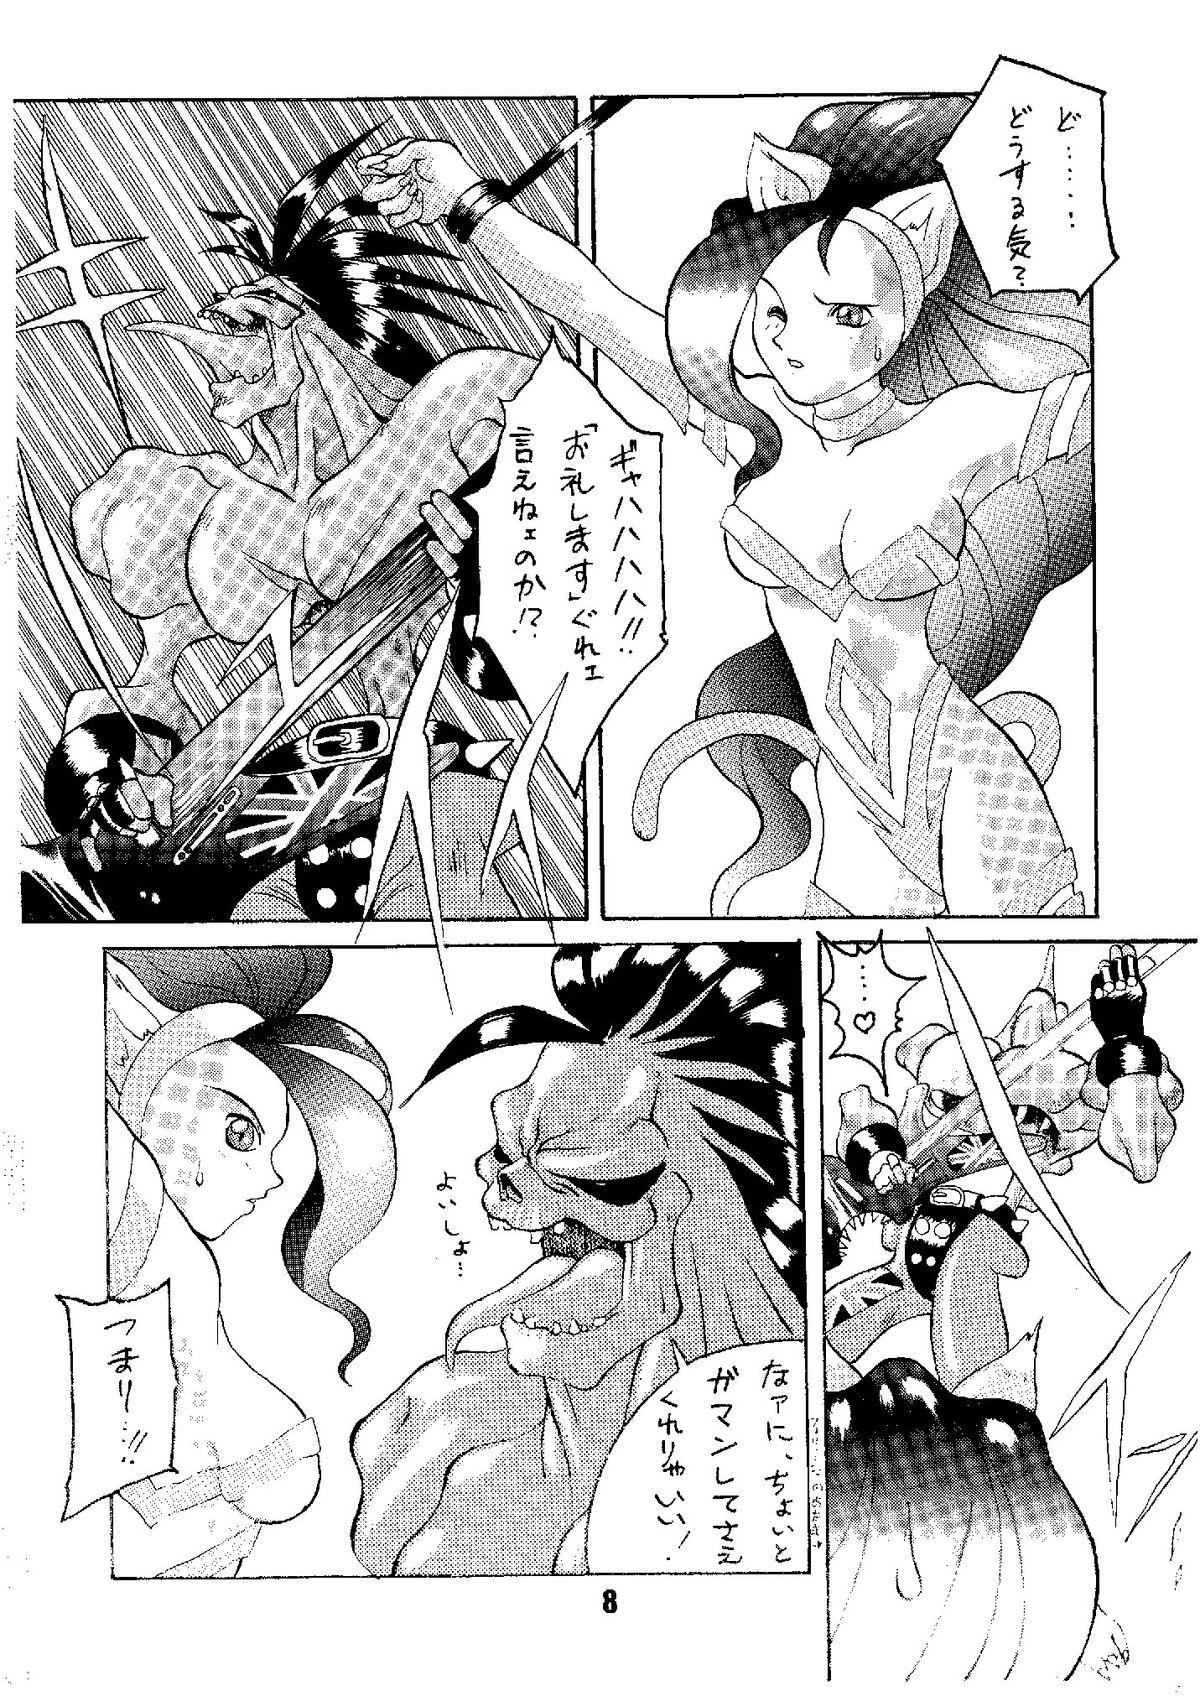 Mature Woman Shine of Darkness - Darkstalkers Toying - Page 8